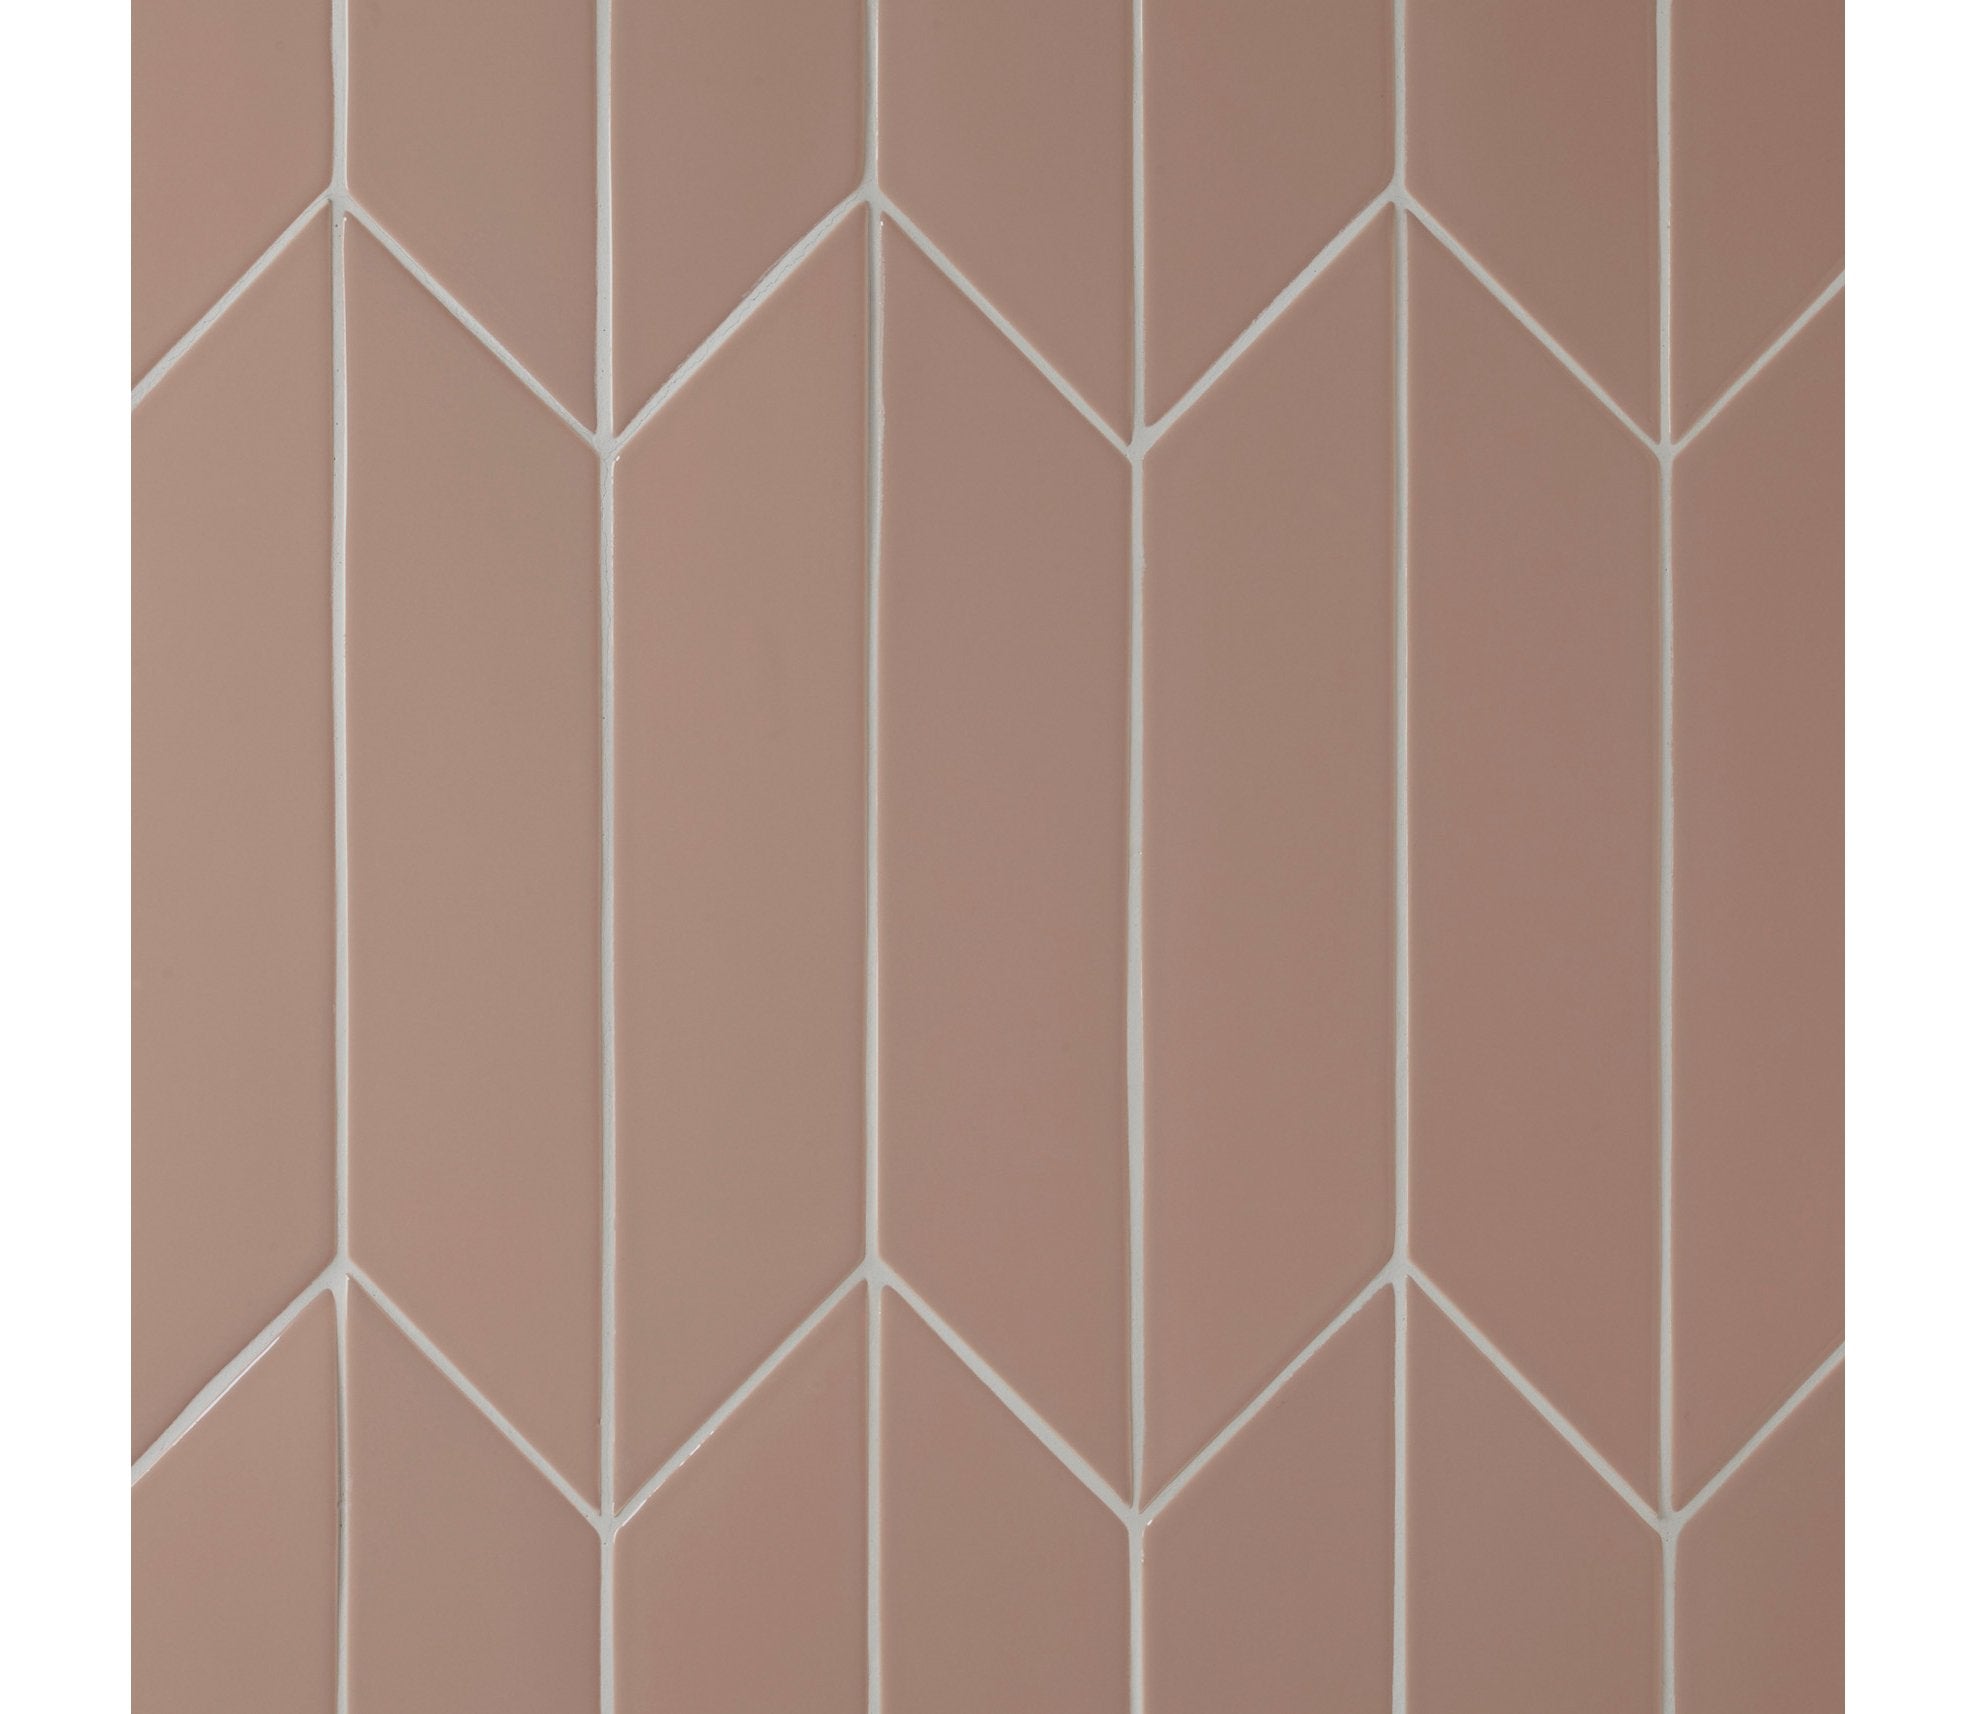 Hanley Traditional Tiles Product Image 17